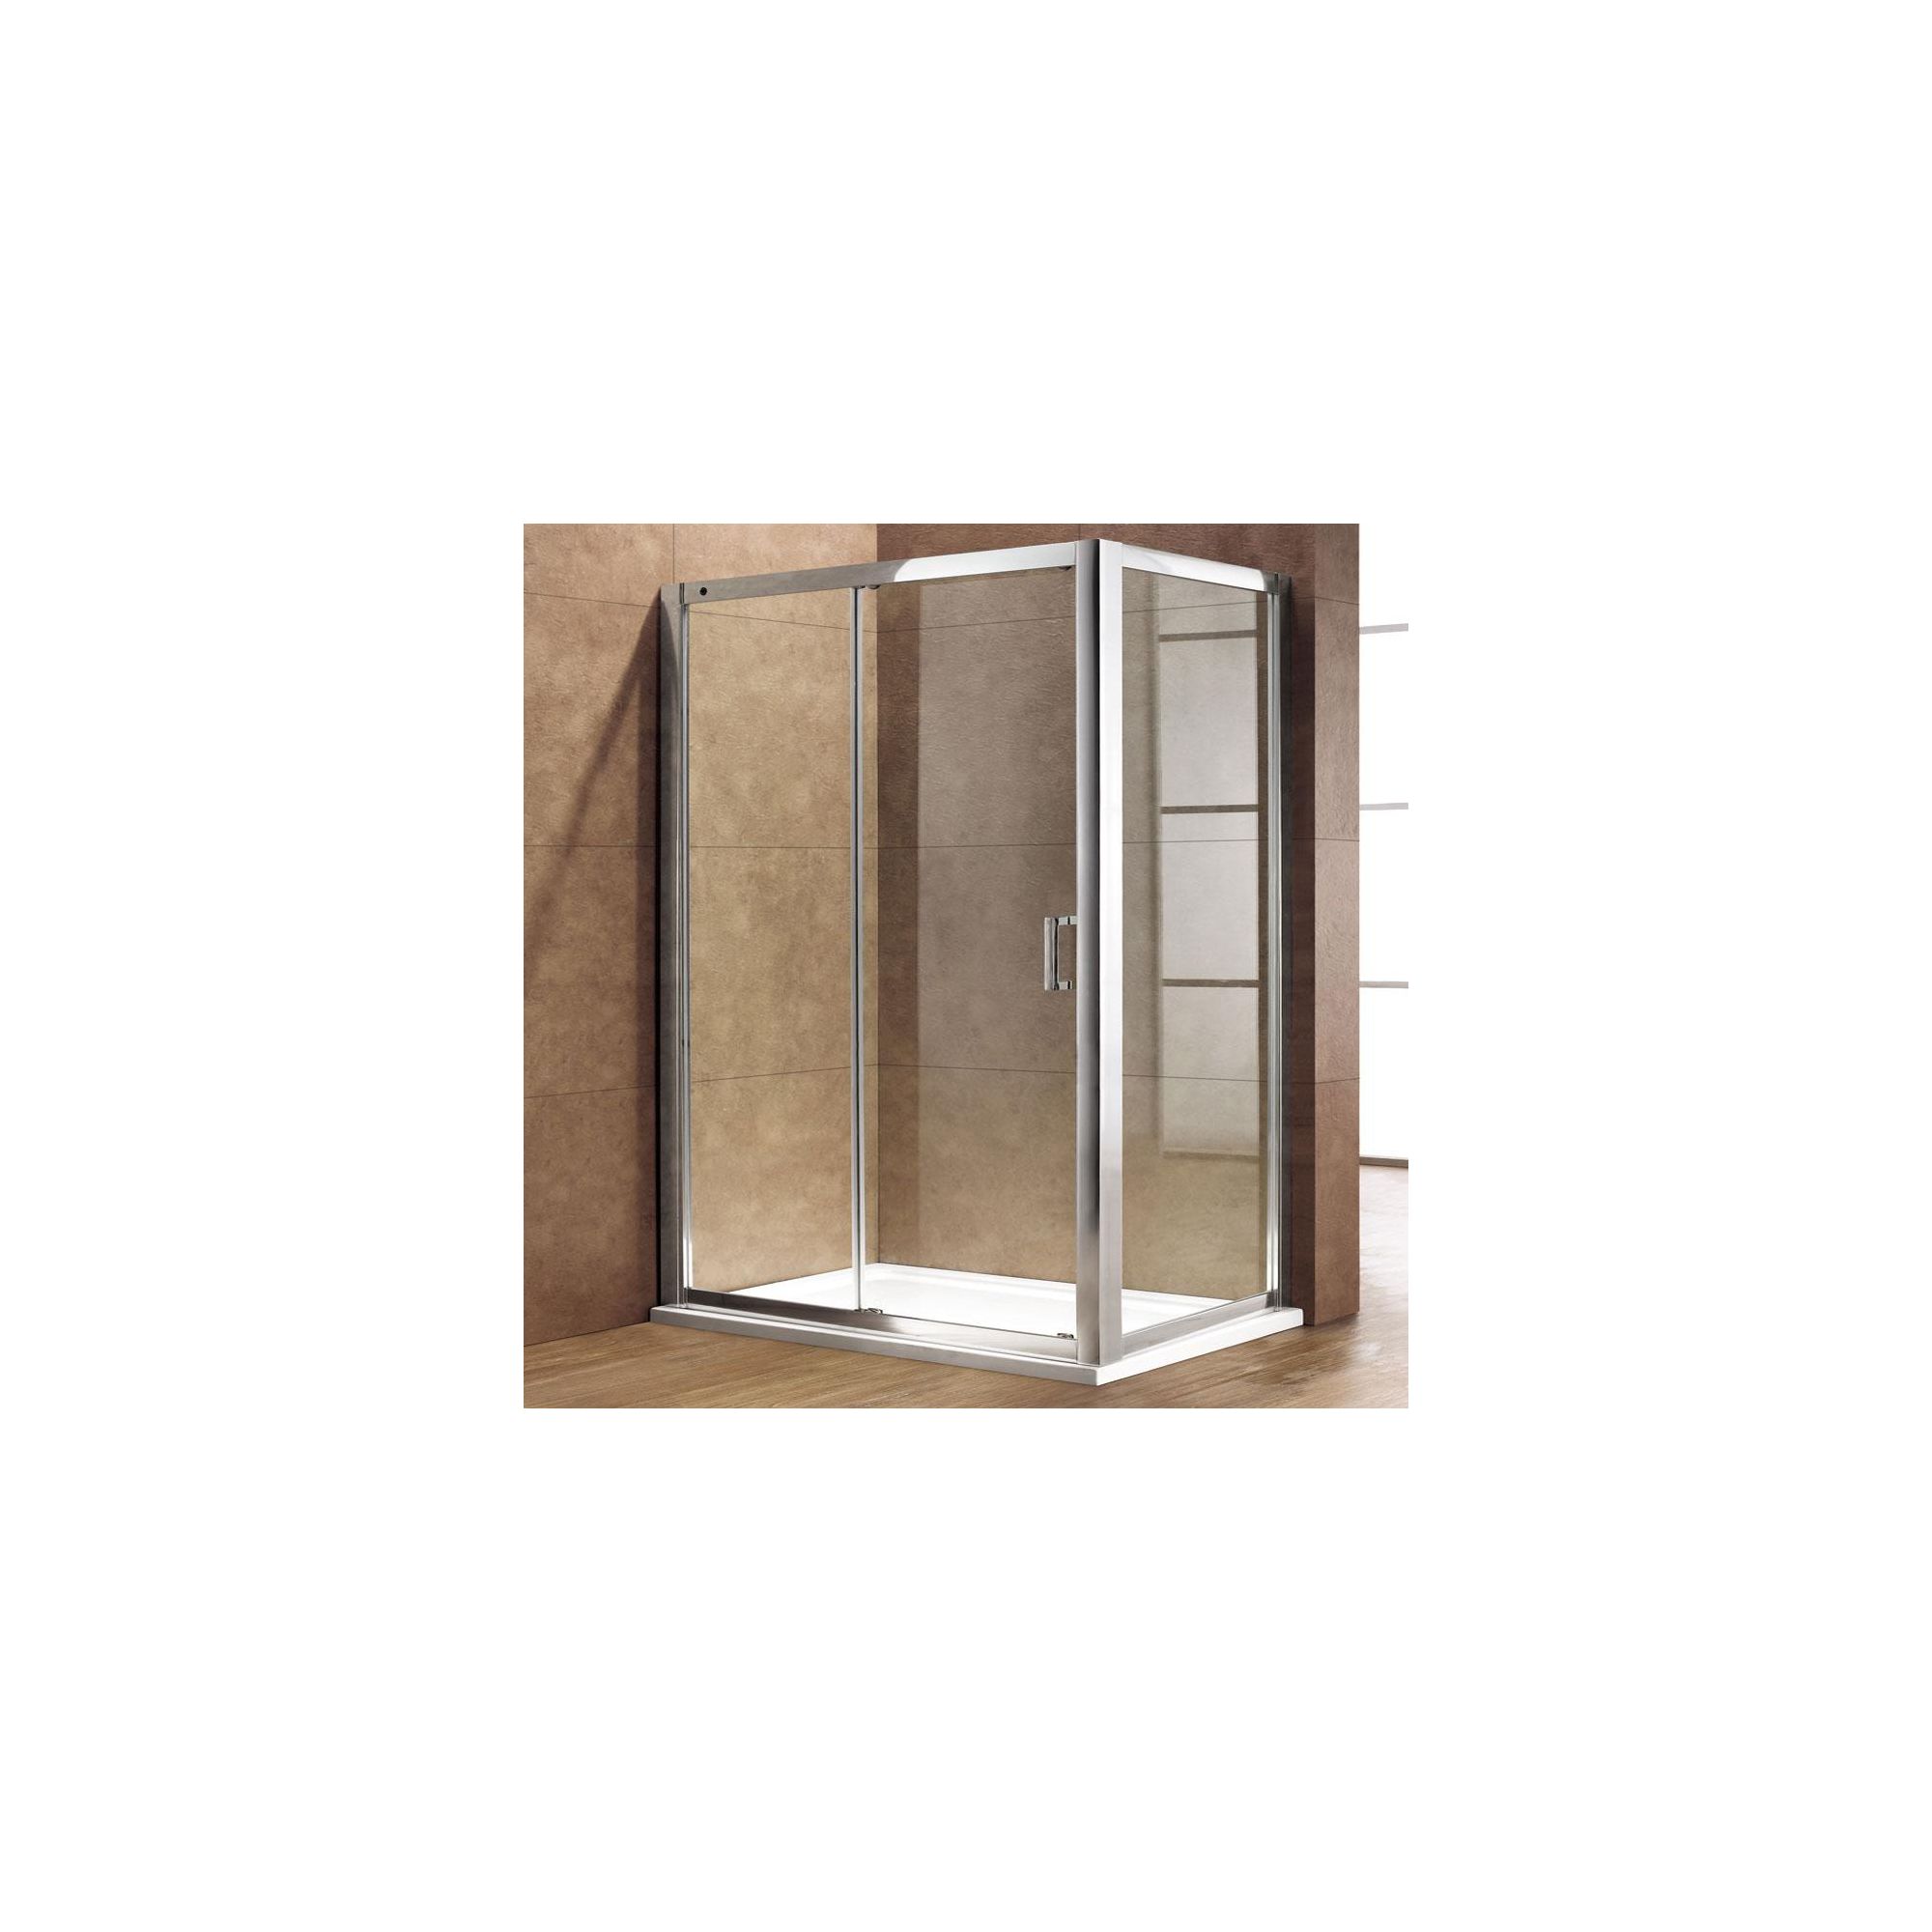 Duchy Premium Single Sliding Door Shower Enclosure, 1000mm x 760mm, 8mm Glass, Low Profile Tray at Tesco Direct